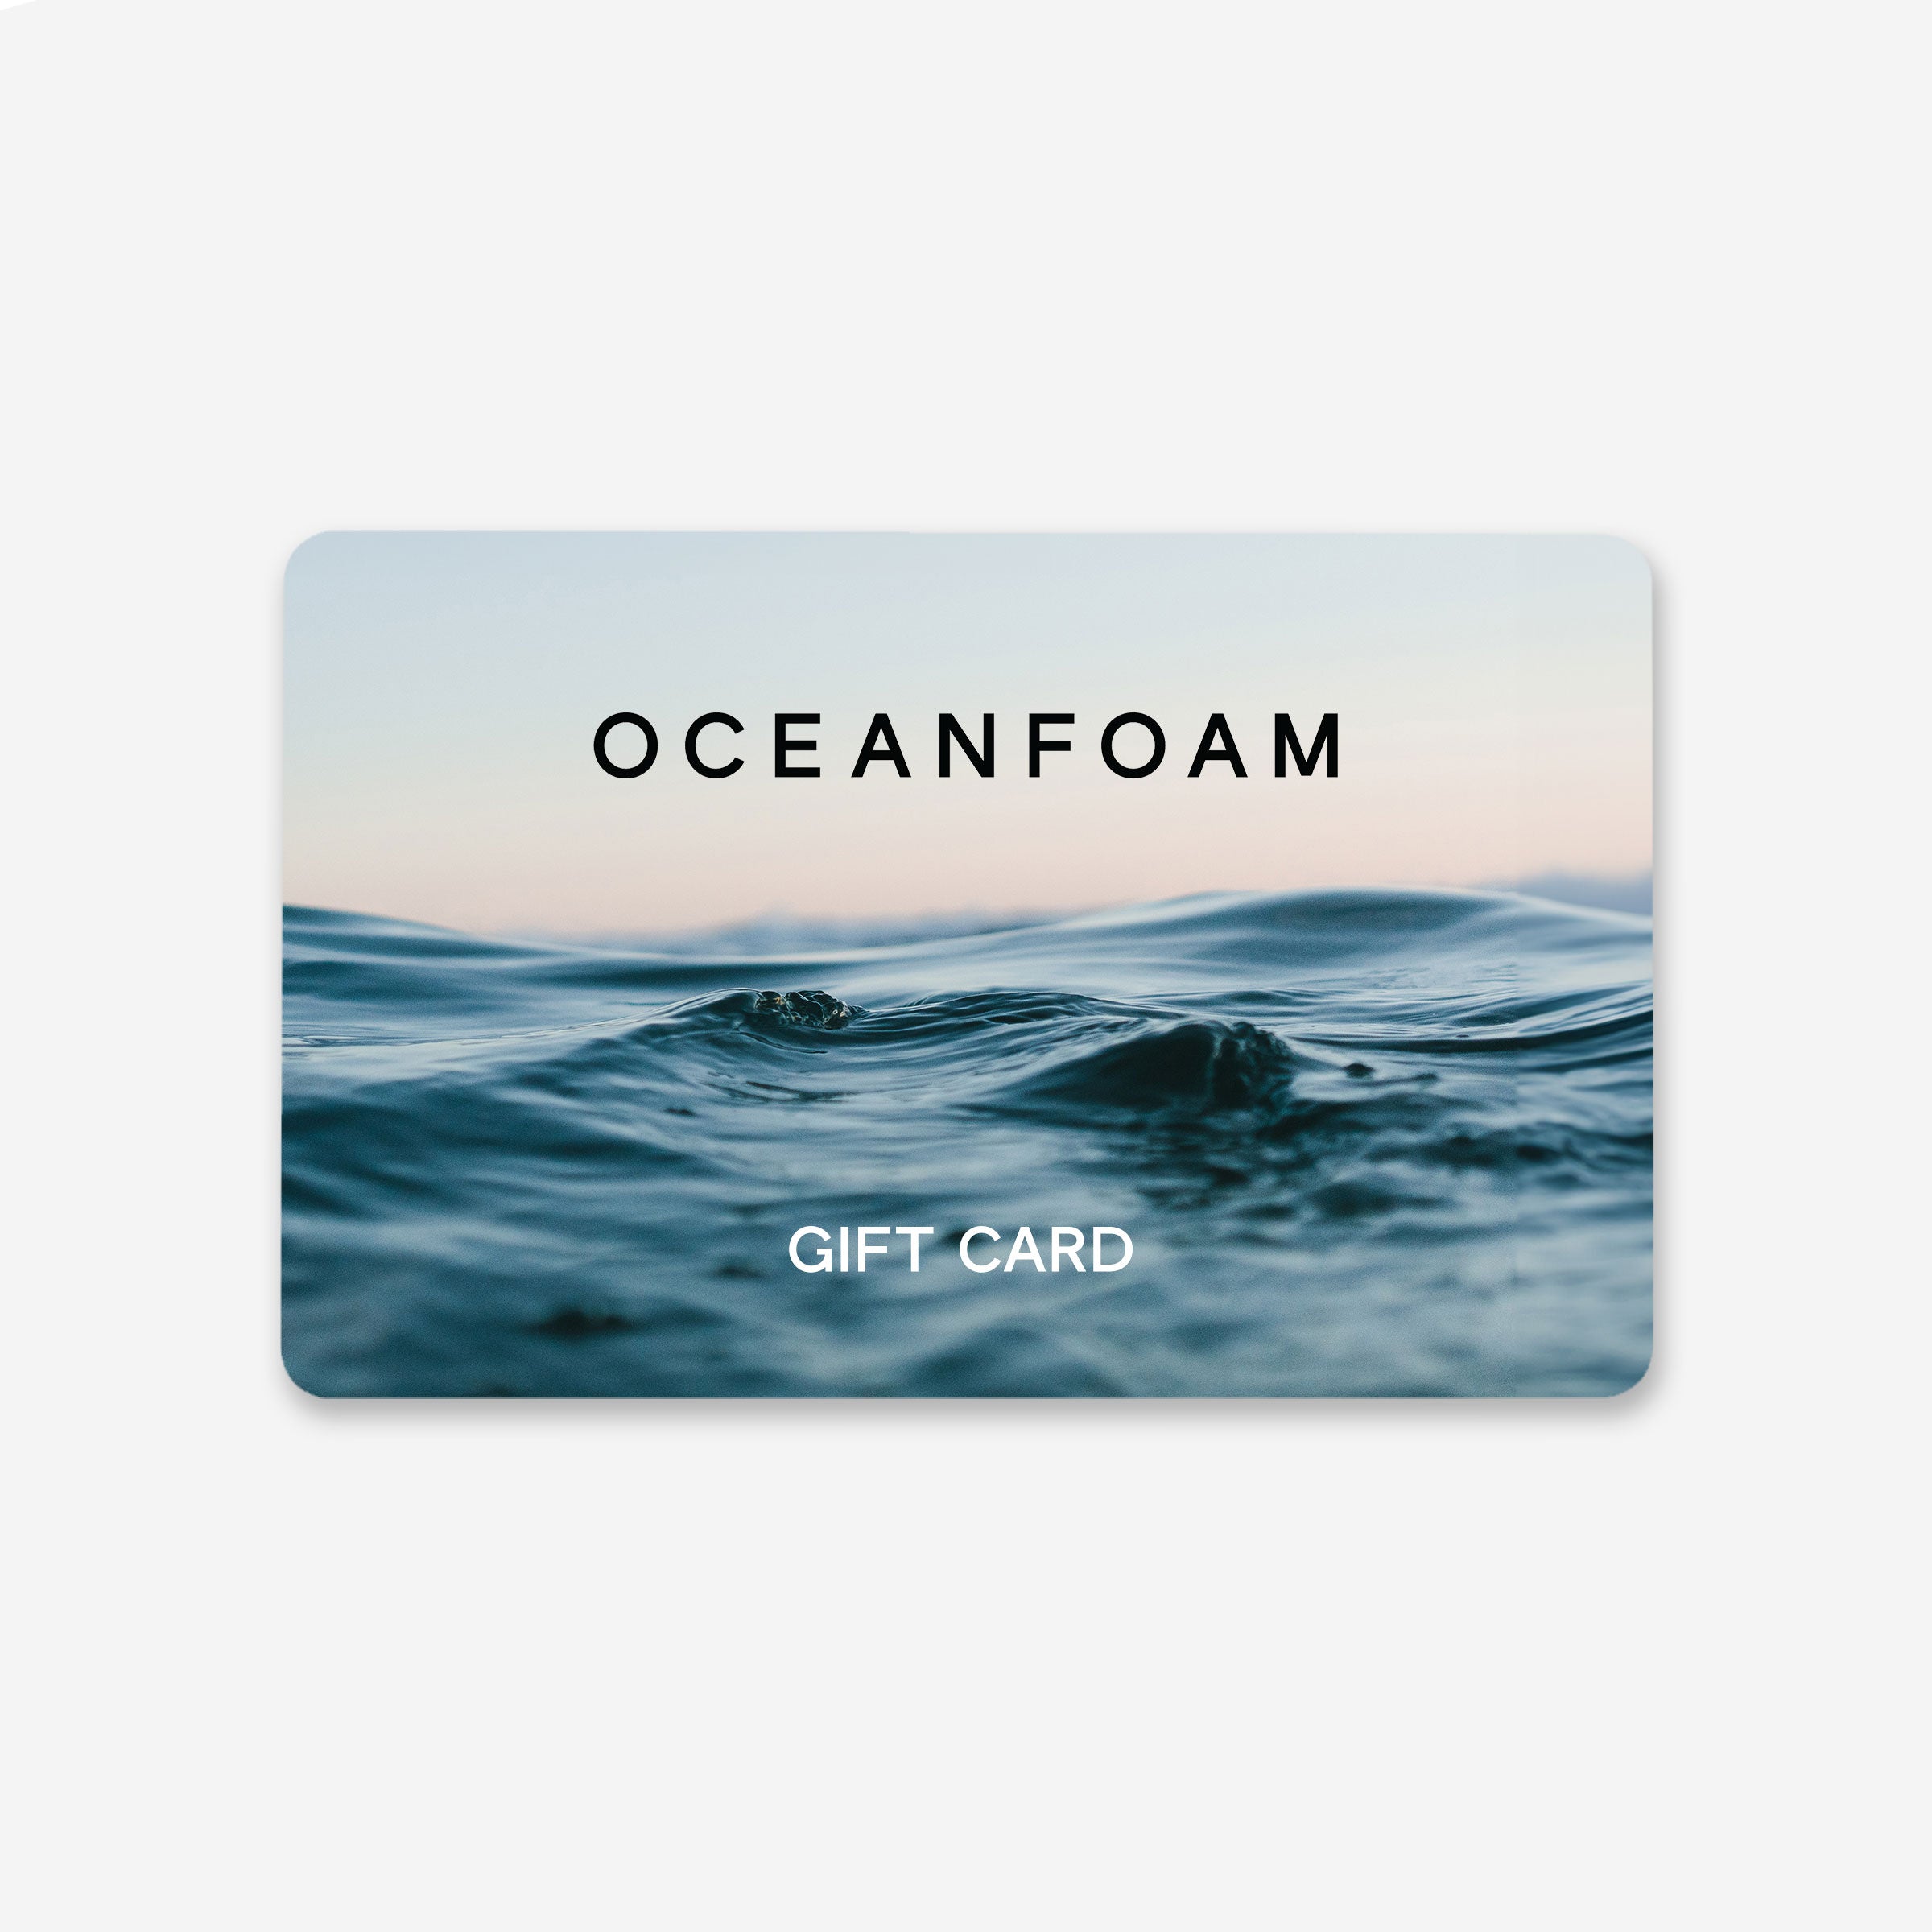 Product image for the OceanFoam gift card featuring a gift-card silhouette with ocean waves, OceanFoam logo on the top third in black and "Gift Card" on the bottom third in white